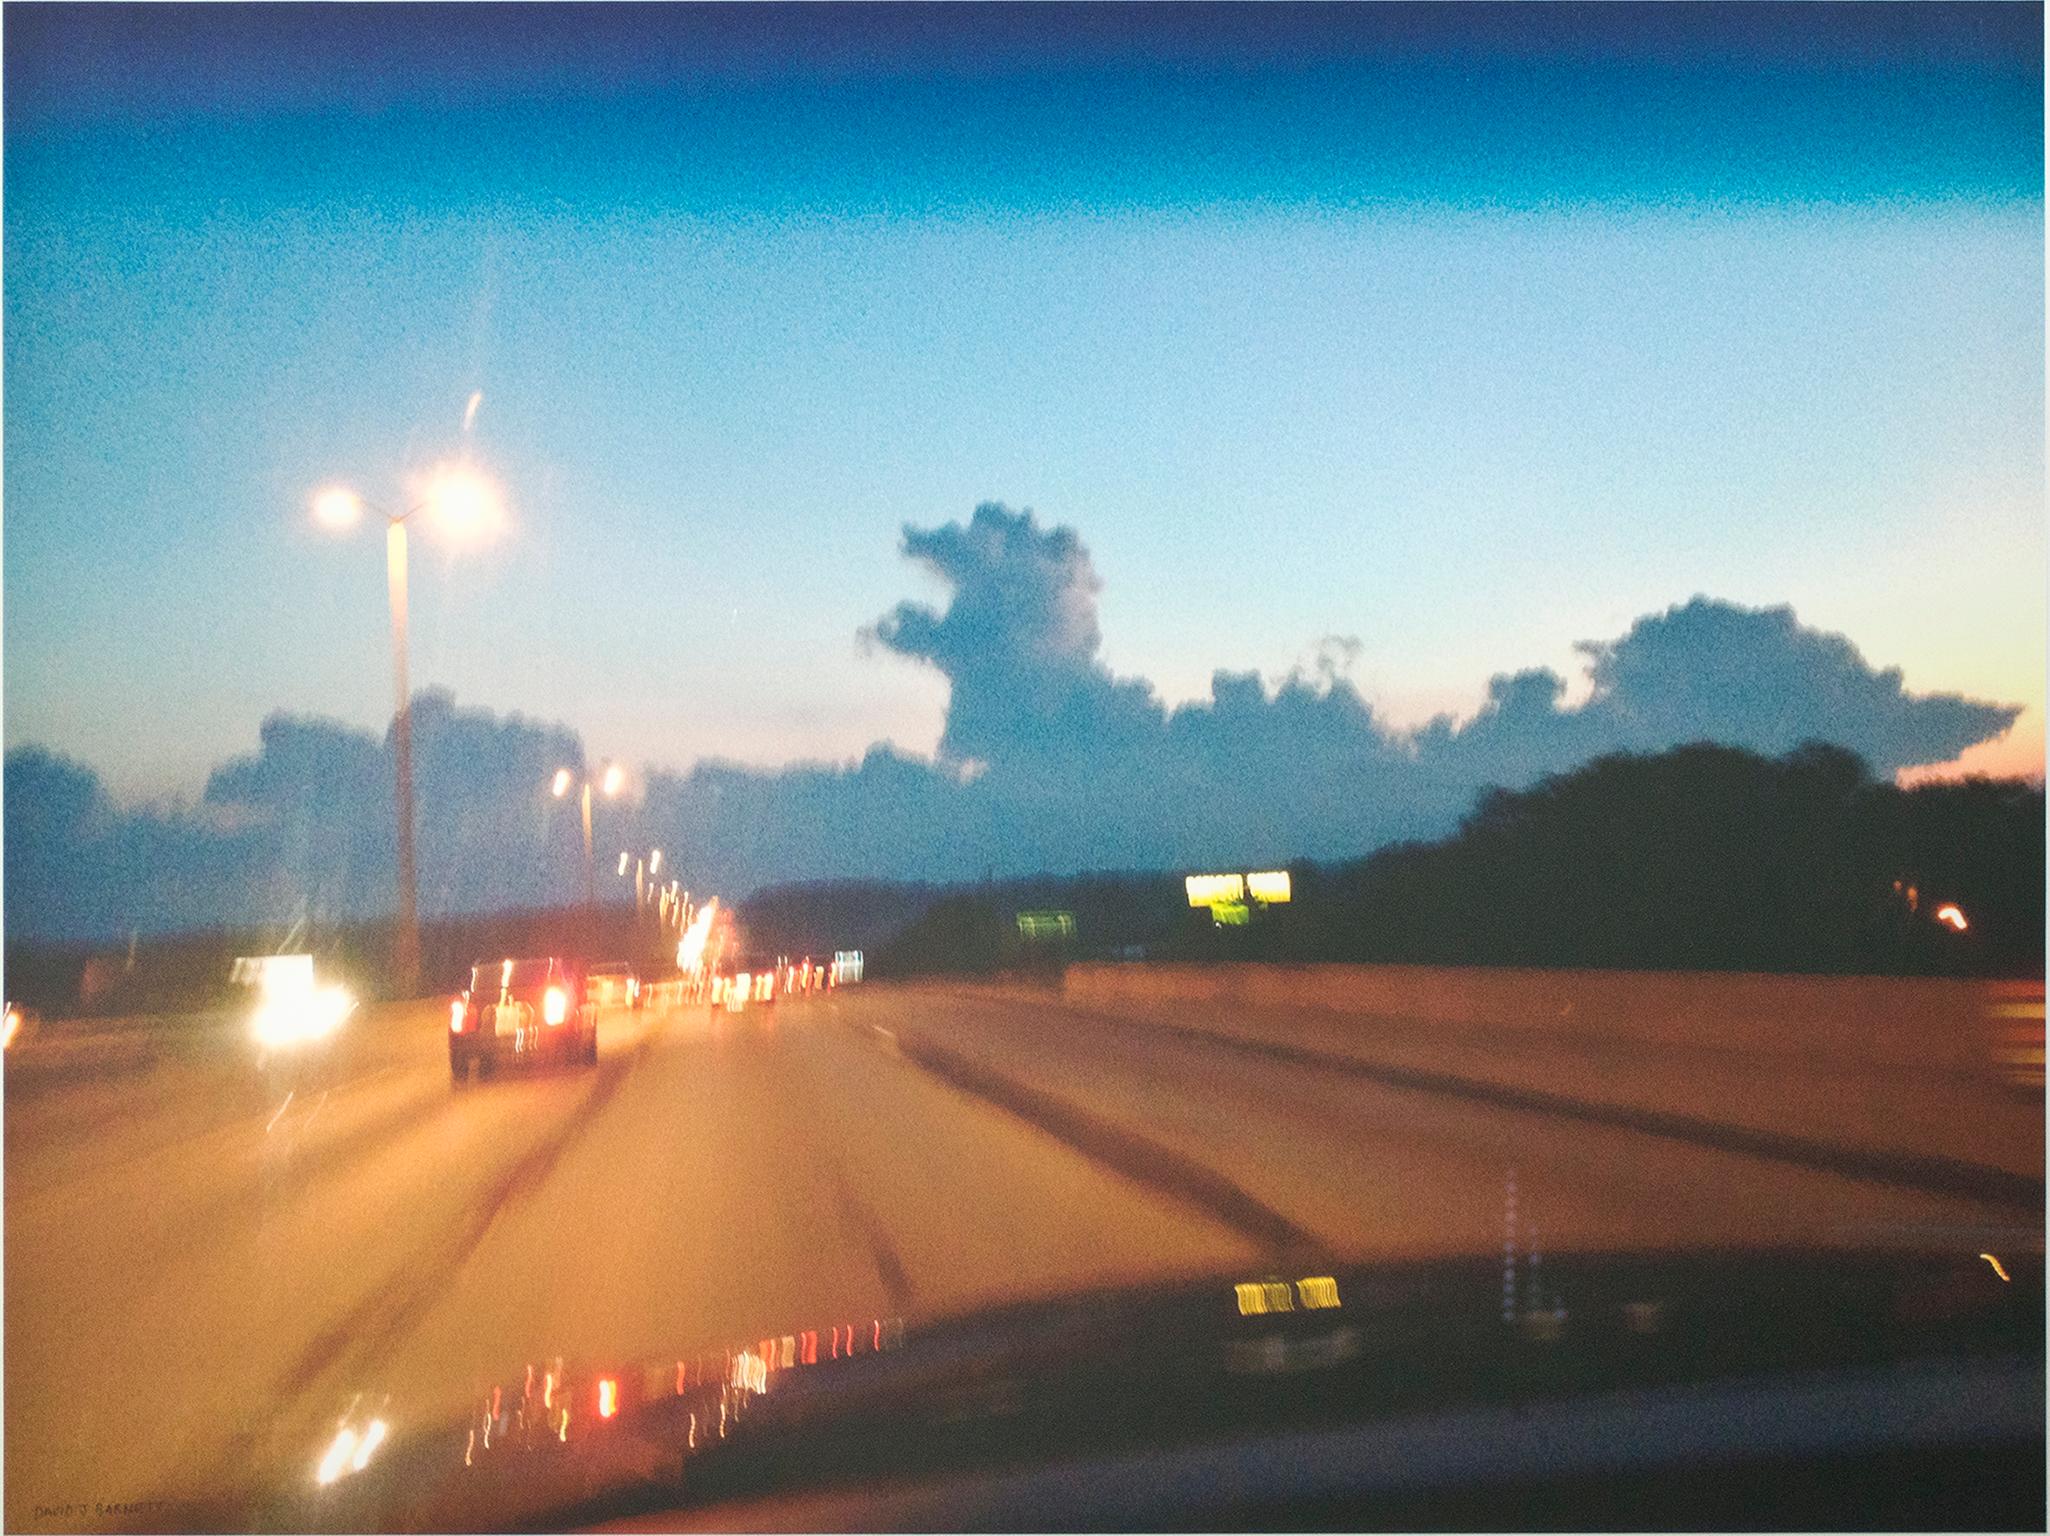 "Dashboard Sky Dragon" is an original photograph by David Barnett, signed in the lower left. The photo was taken during a commute when the artist was struck by the cloud formations as the sun sank behind them. The foreground is allowed to blur with